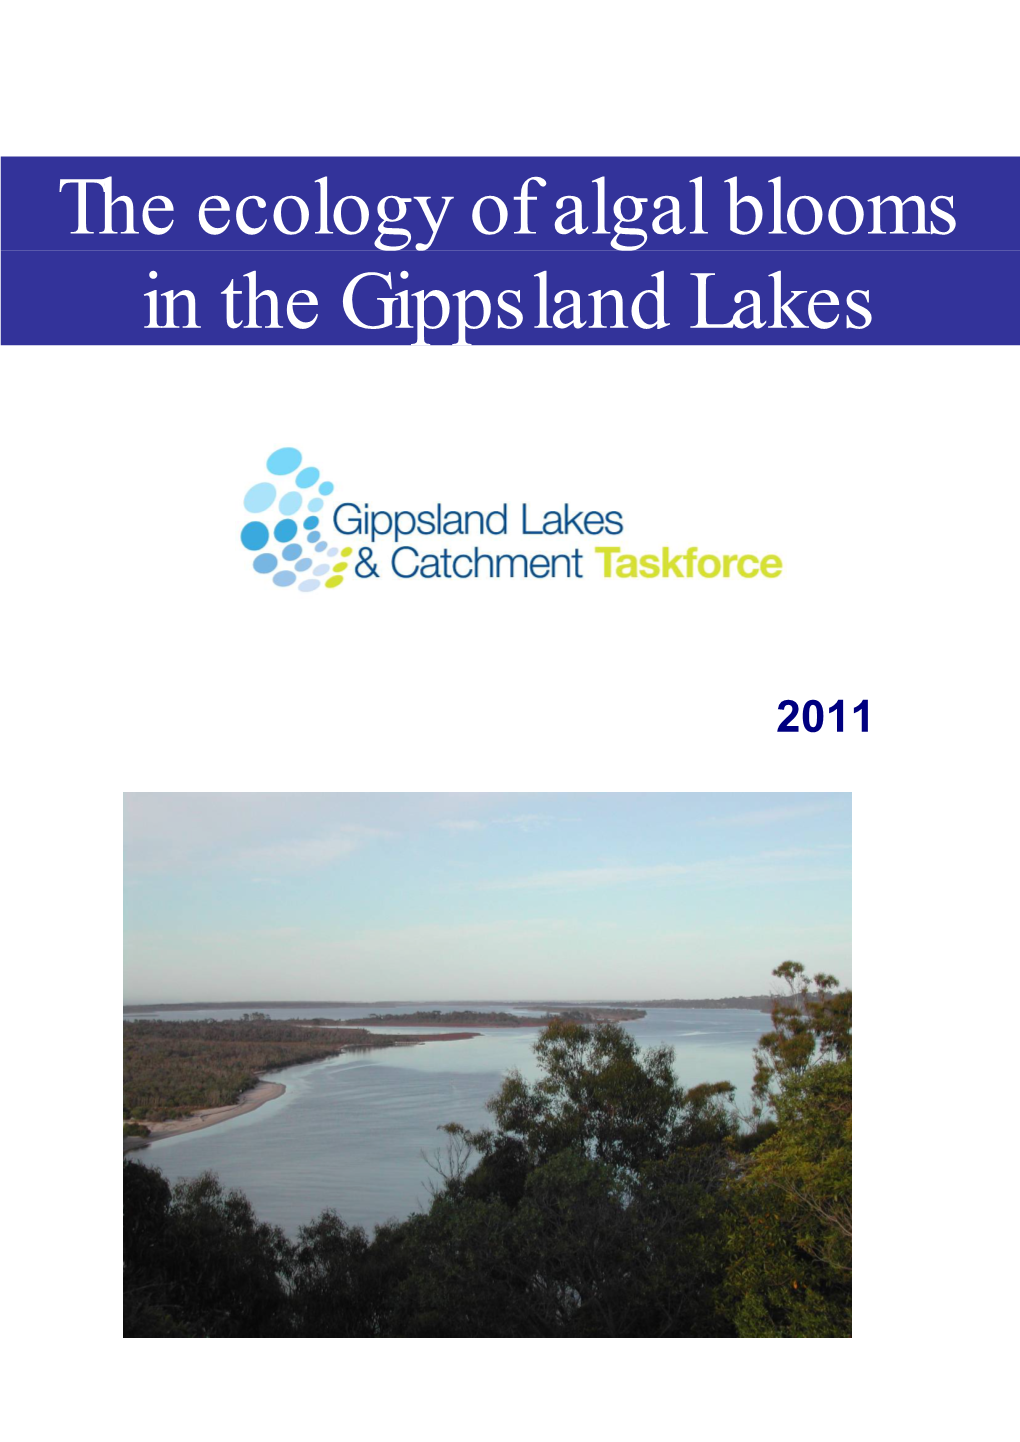 The Ecology of Algal Blooms in the Gippsland Lakes